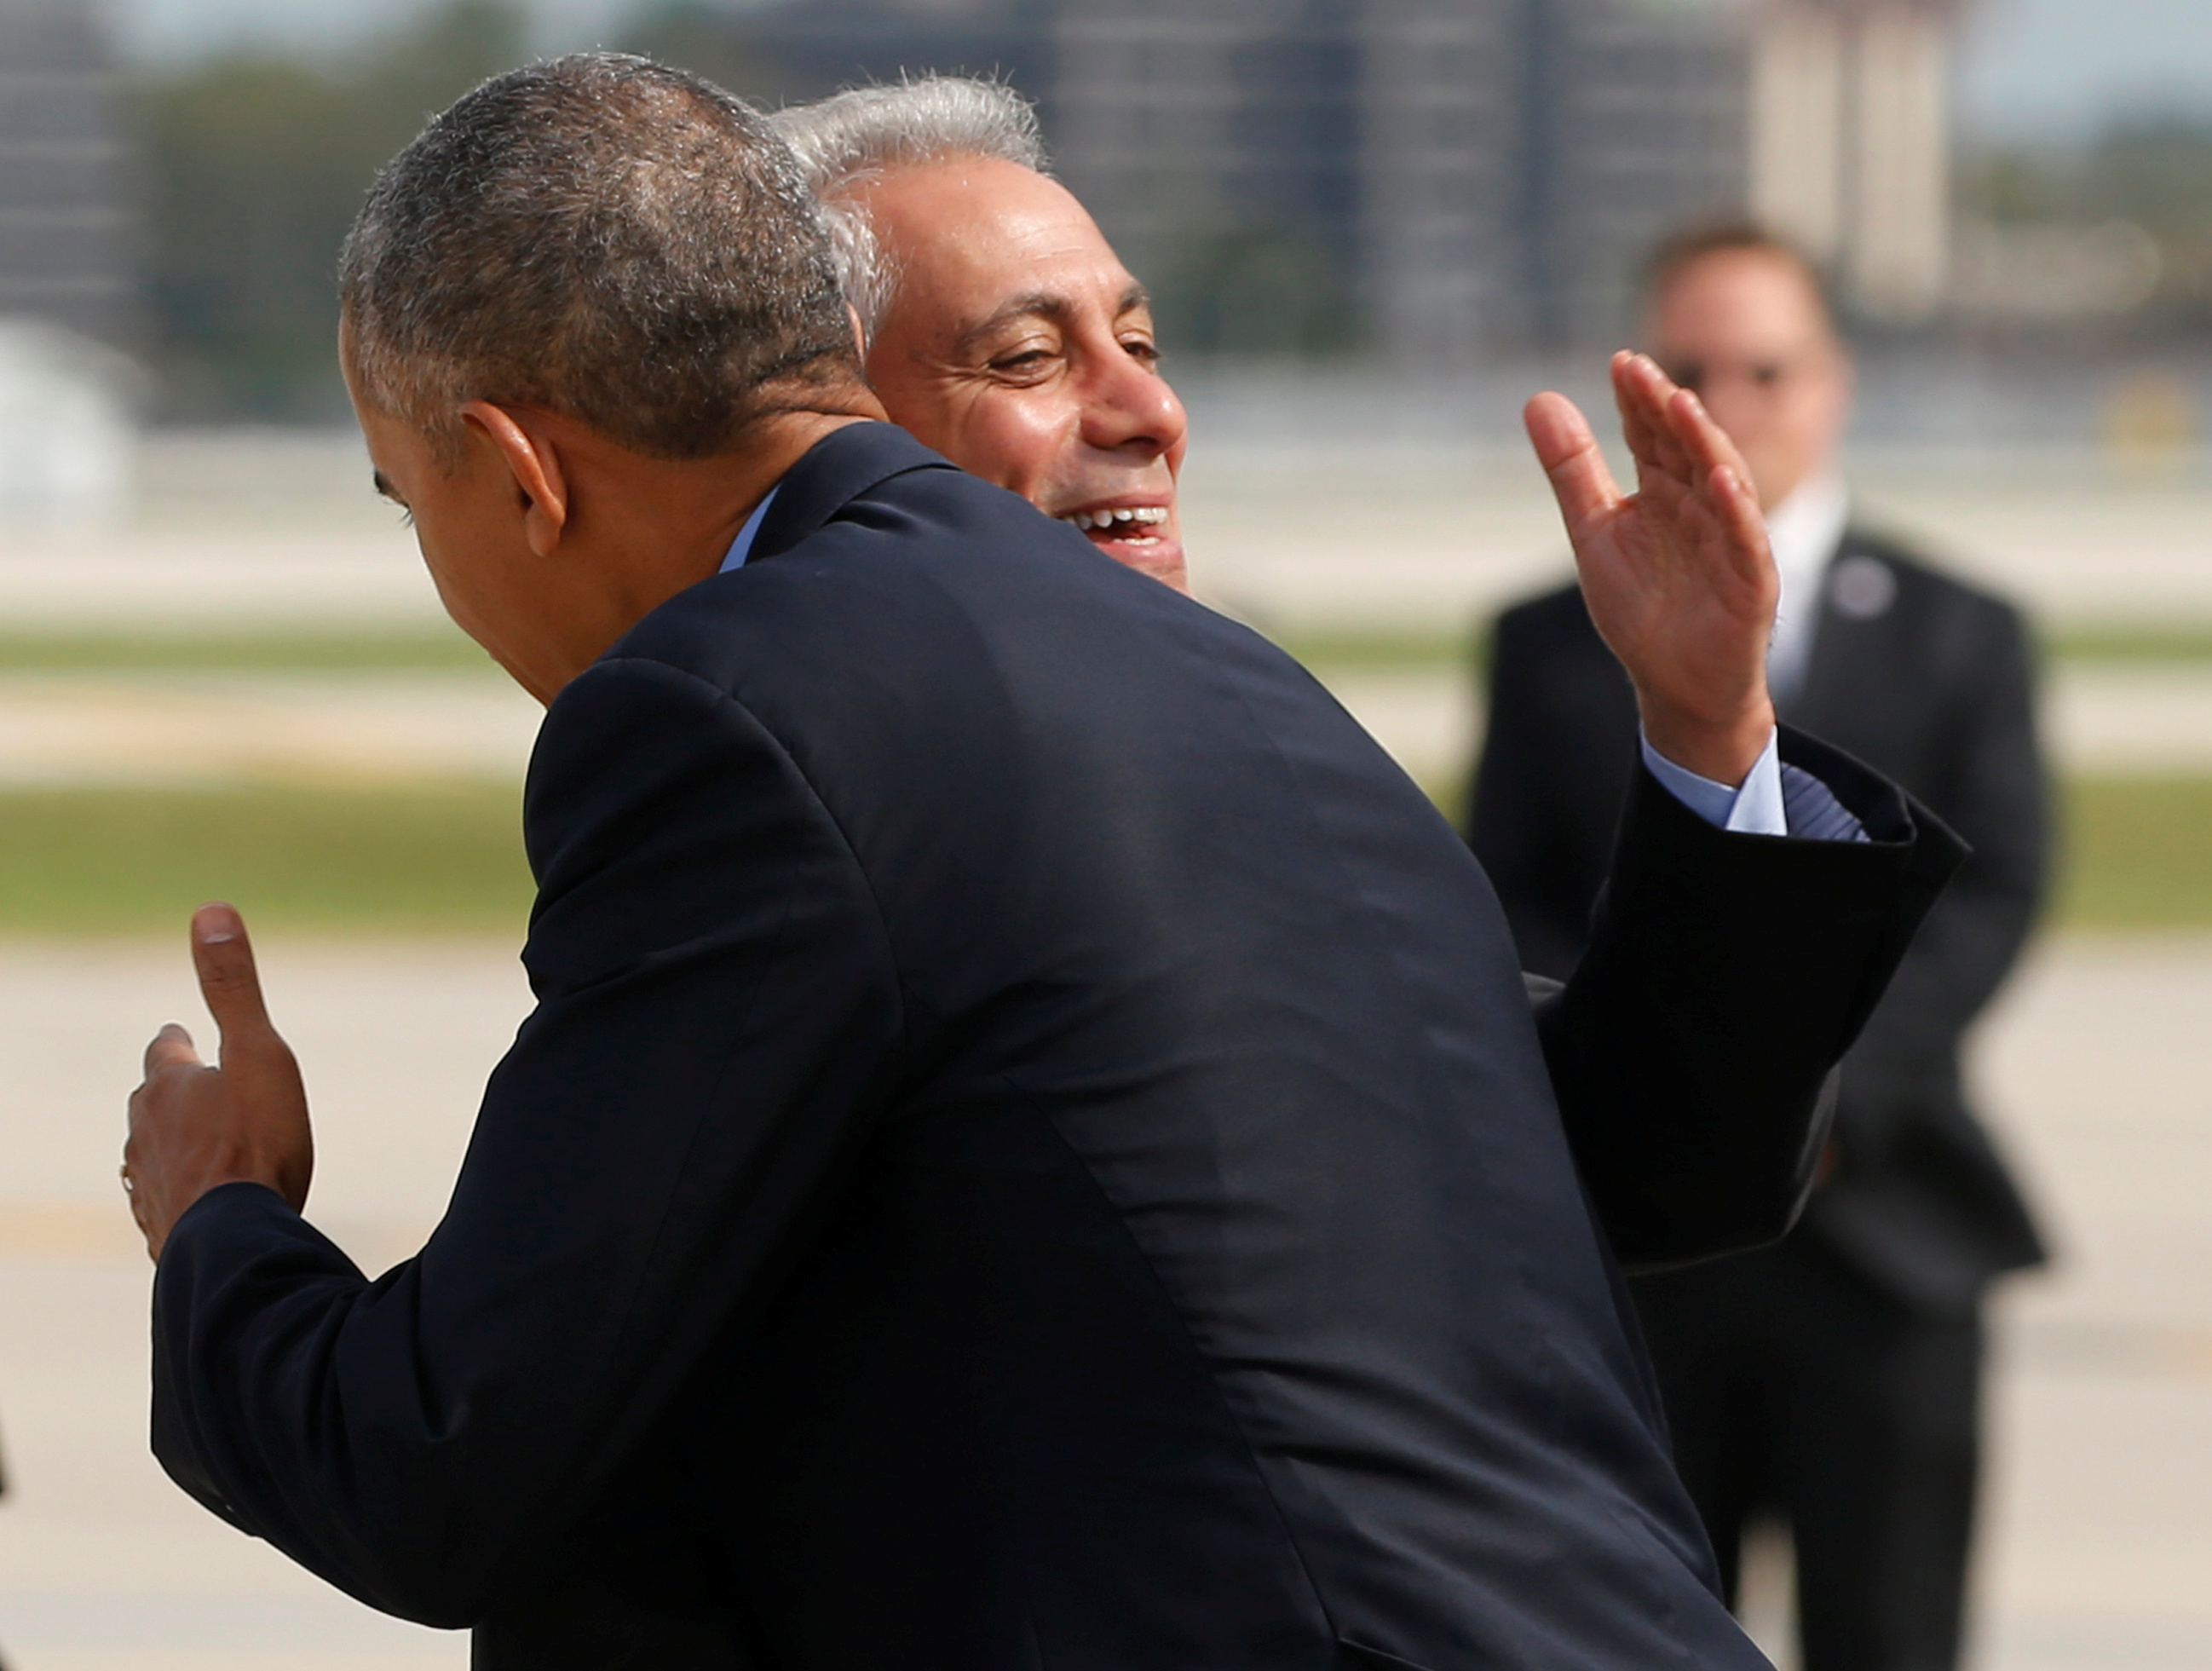 Chicago Mayor Rahm Emanuel greets U.S. President Barack Obama (foreground) as he arrives aboard Air Force One at O'Hare International Airport in Chicago, Illinois, U.S. October 7, 2016. REUTERS/Jonathan Ernst 